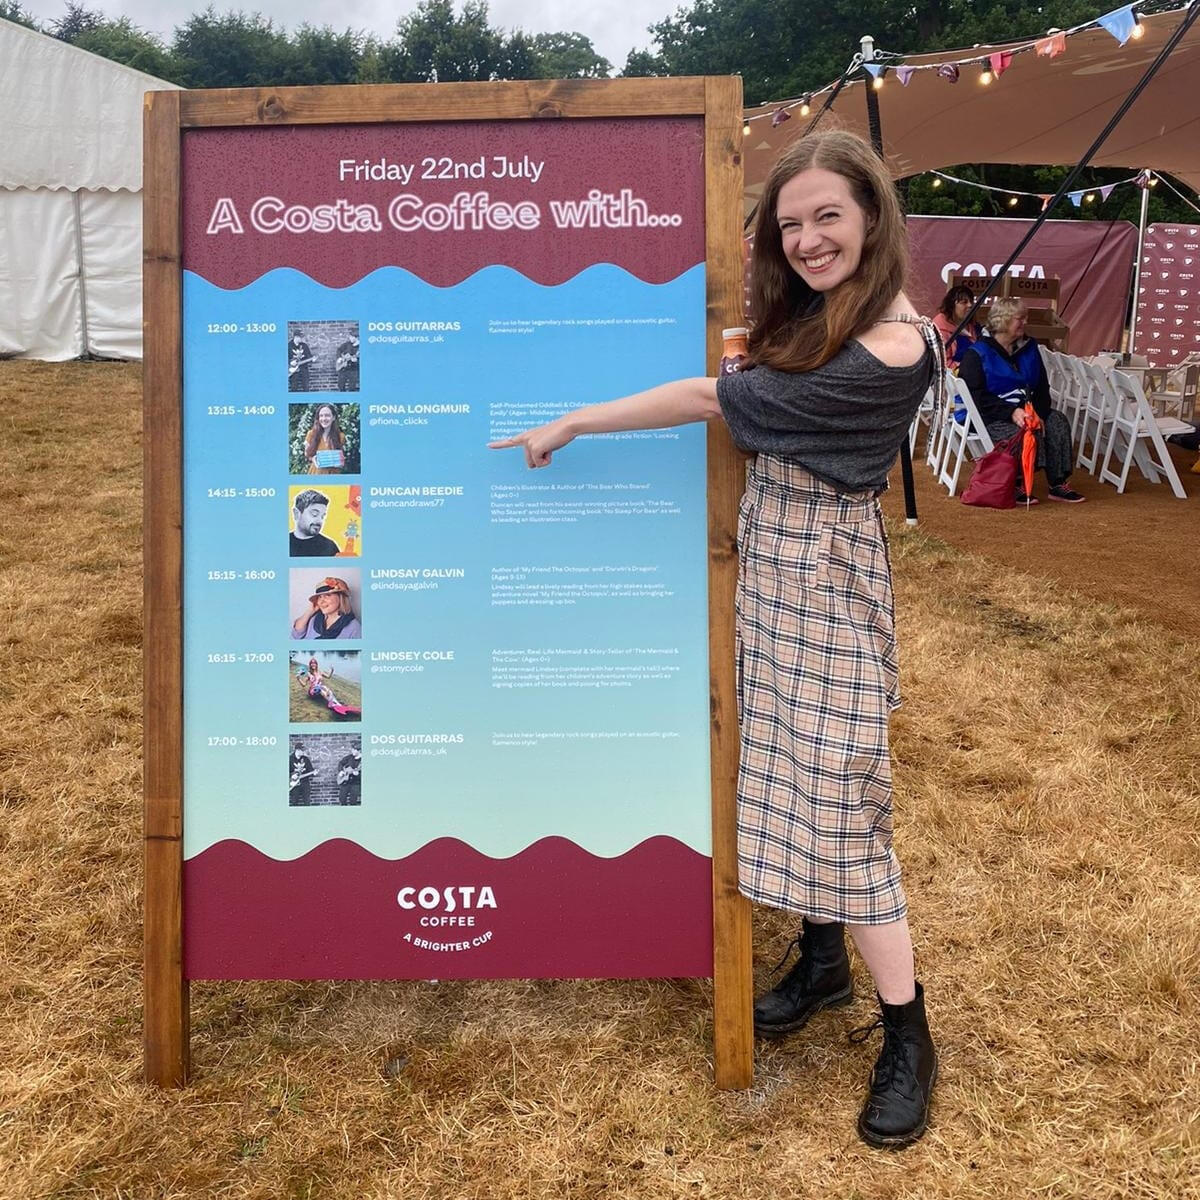 Fiona is pointing to her session on the Costa Coffee Reading Room programme board and grinning